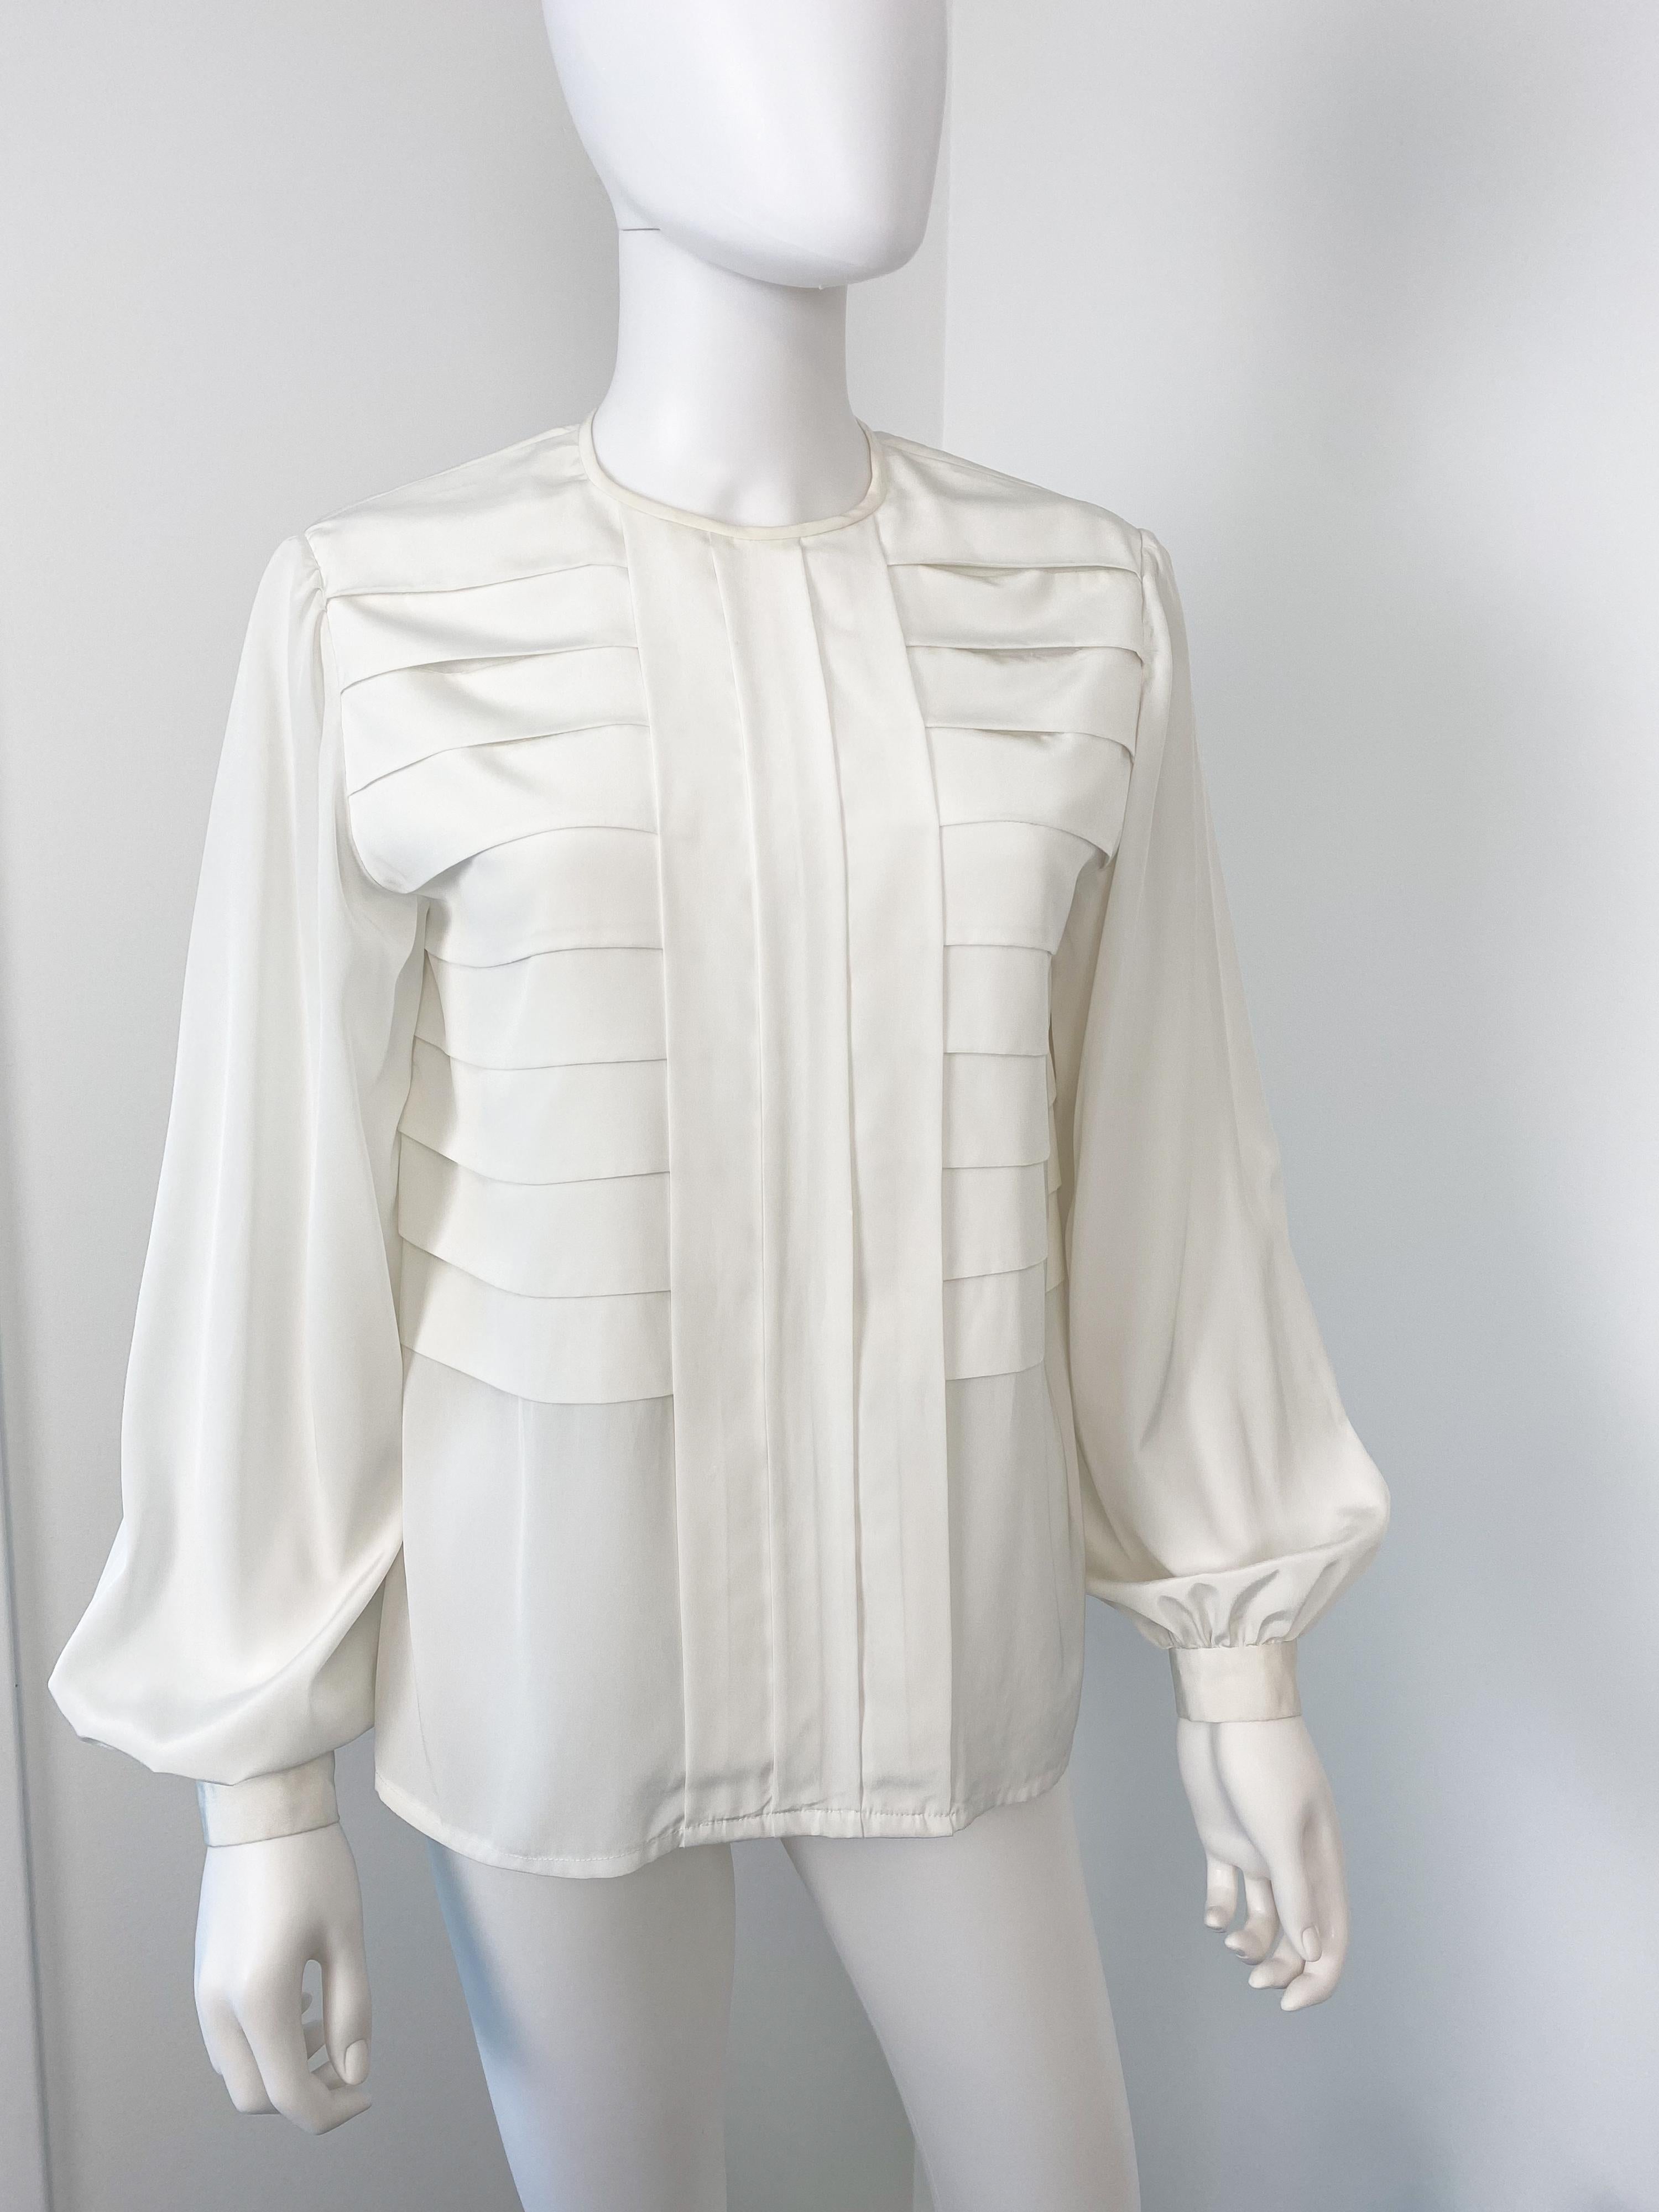 Wonderful vintage 1970s silky polyester blouse. White color fabric with geometric origami pleats. Buttons closing at the back and crewneck shape. There is gentle pleating at button cuffs to provide volume.

Brand: Unknown
Model: Polyester